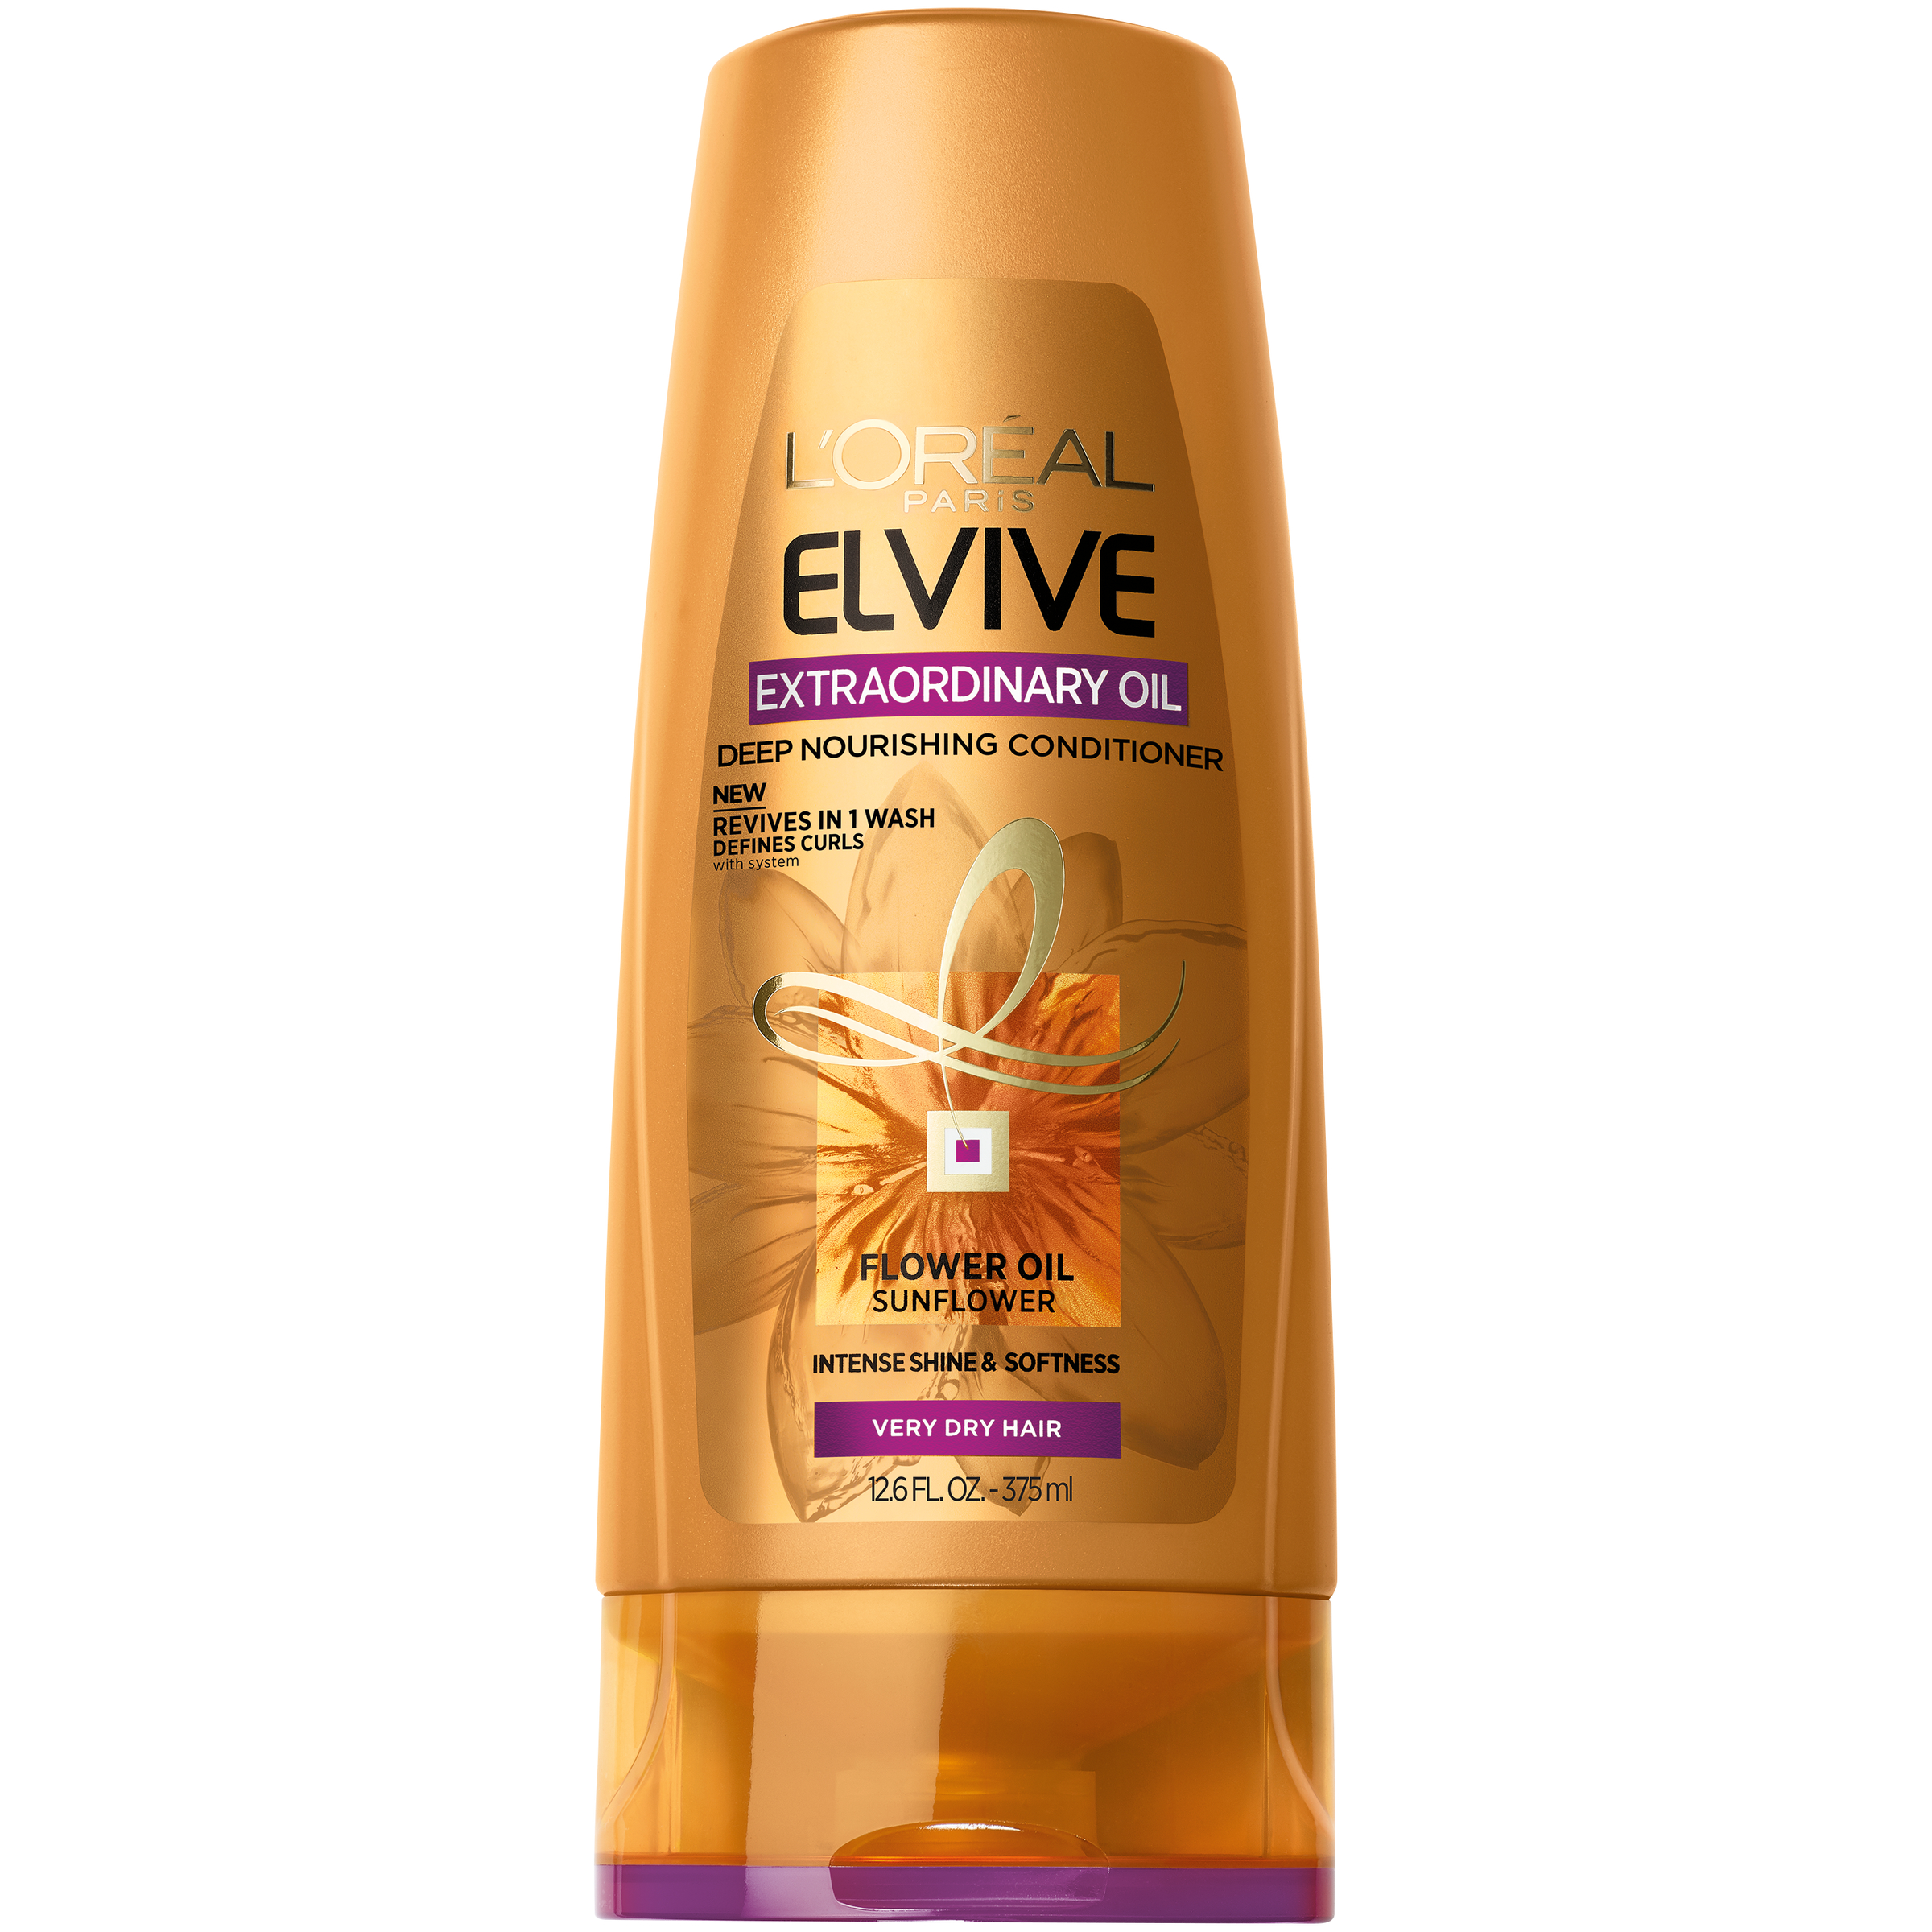 L'Oreal Paris Elvive Extraordinary Oil Conditioner for Curly Hair, 12.6 oz - image 1 of 6